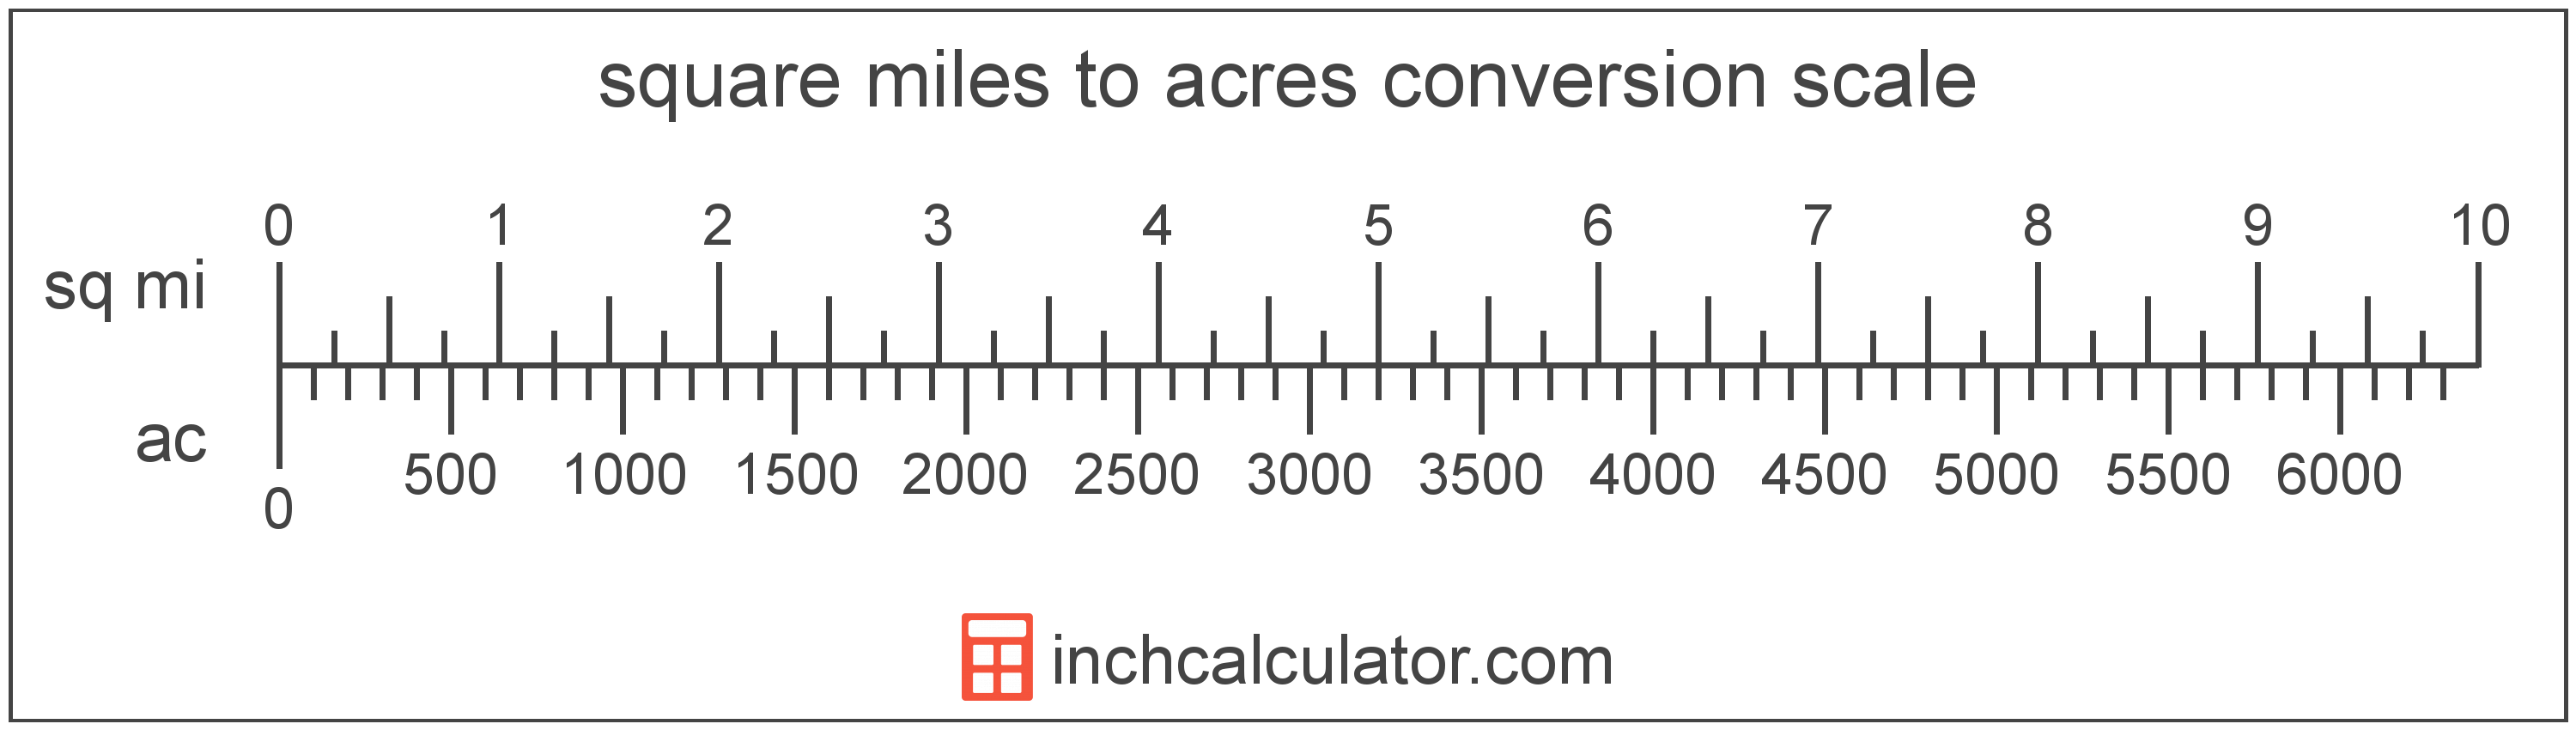 conversion scale showing acres and equivalent square miles area values